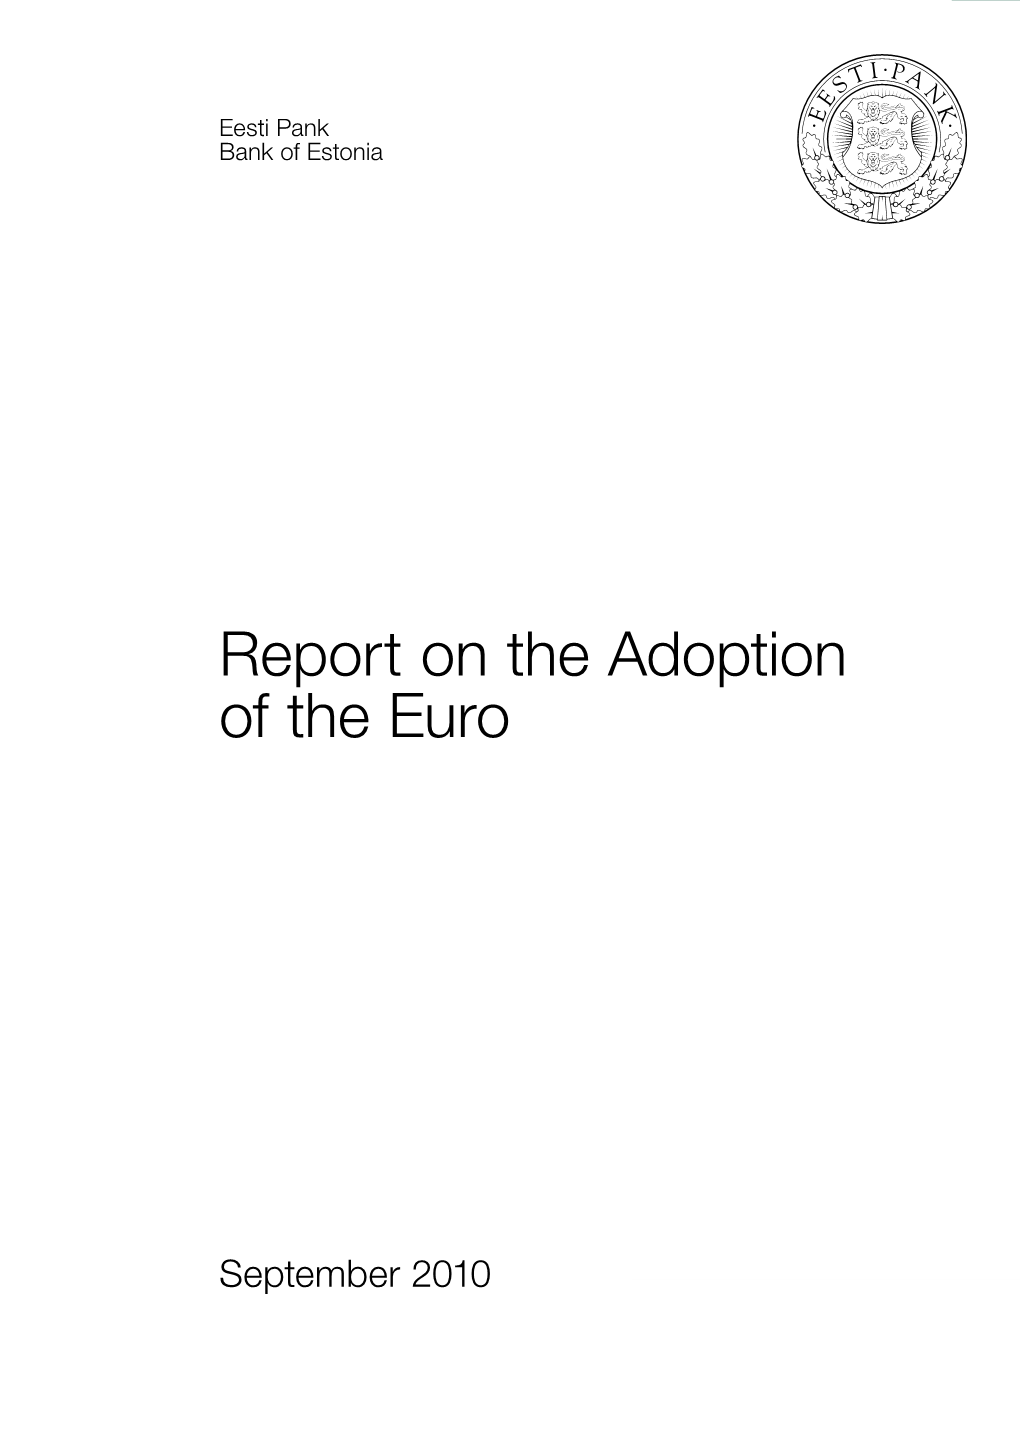 Report on the Adoption of the Euro